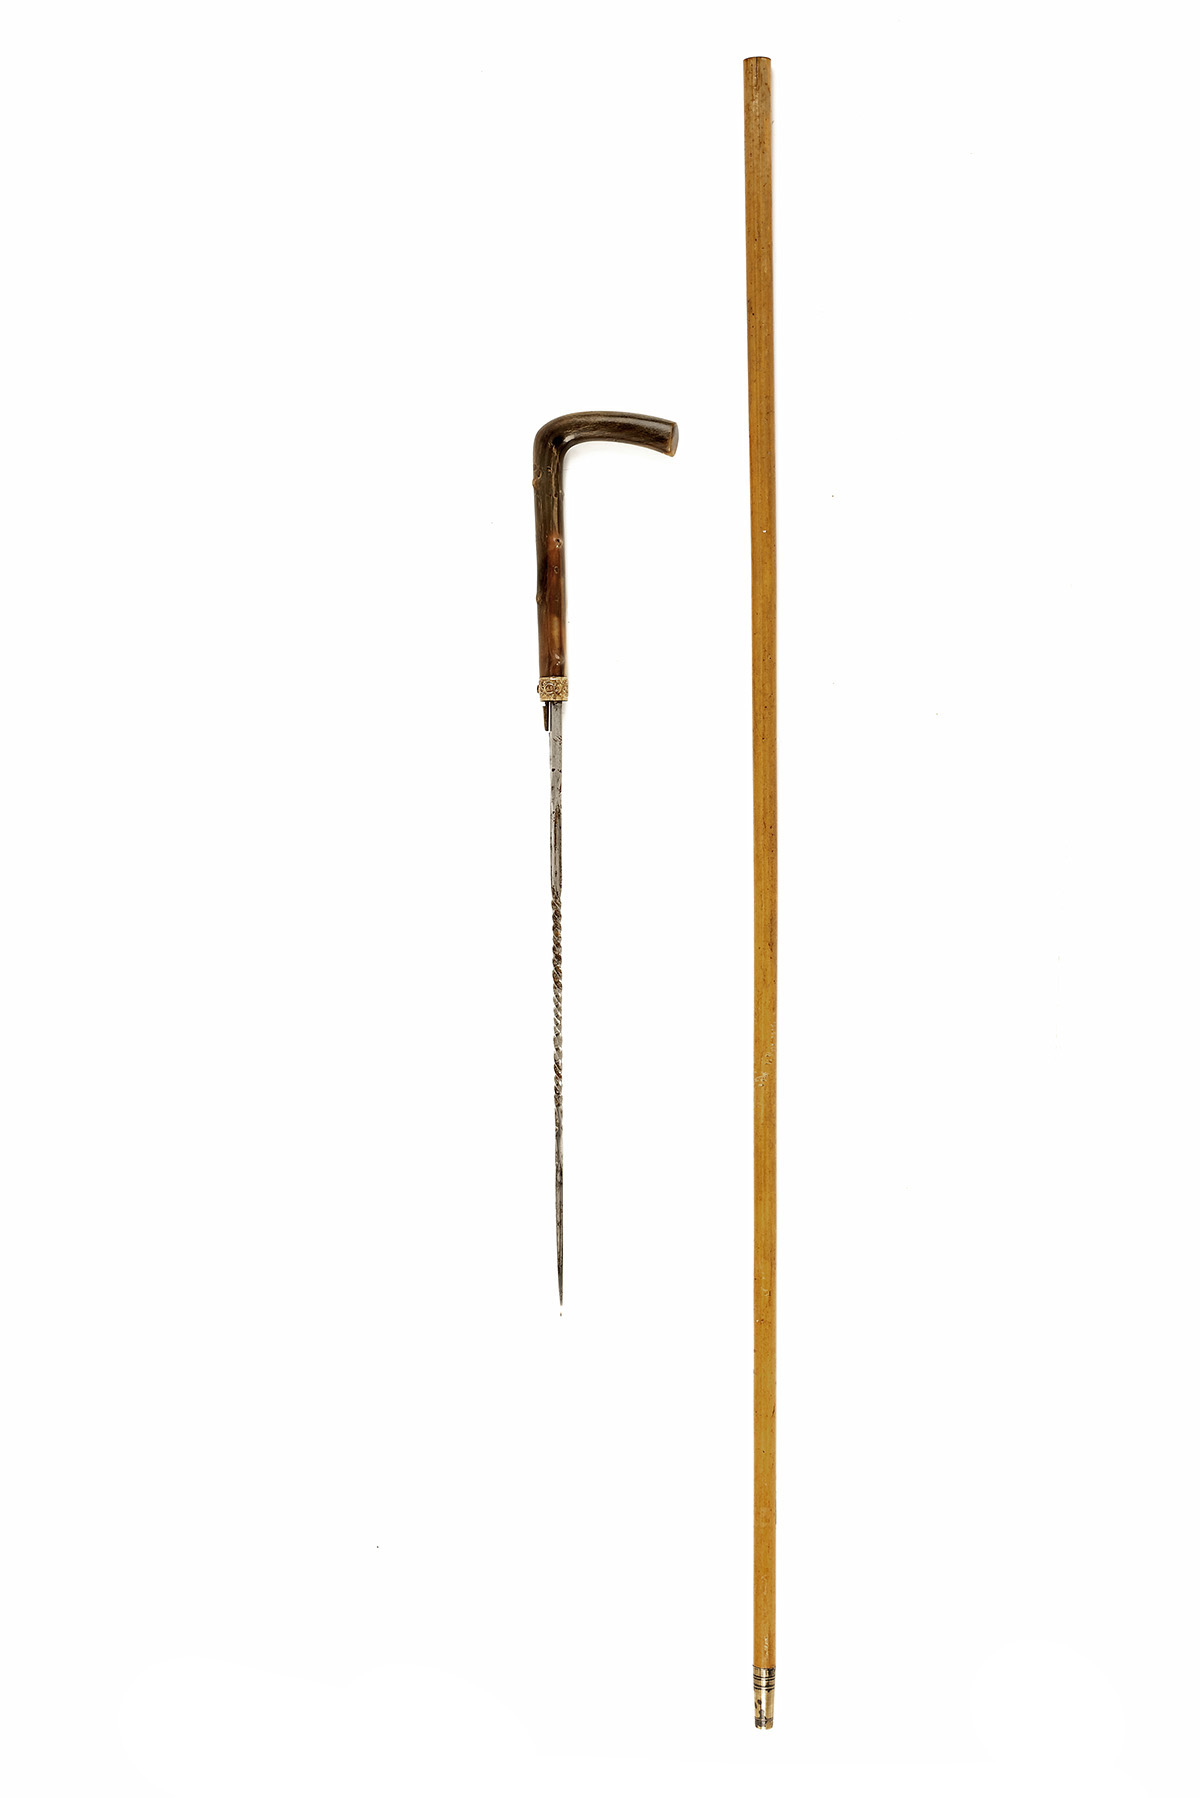 A GOOD LATE GEORGIAN DAGGER-STICK, circa 1810, 33 1/4in. overall with slender cane shaft